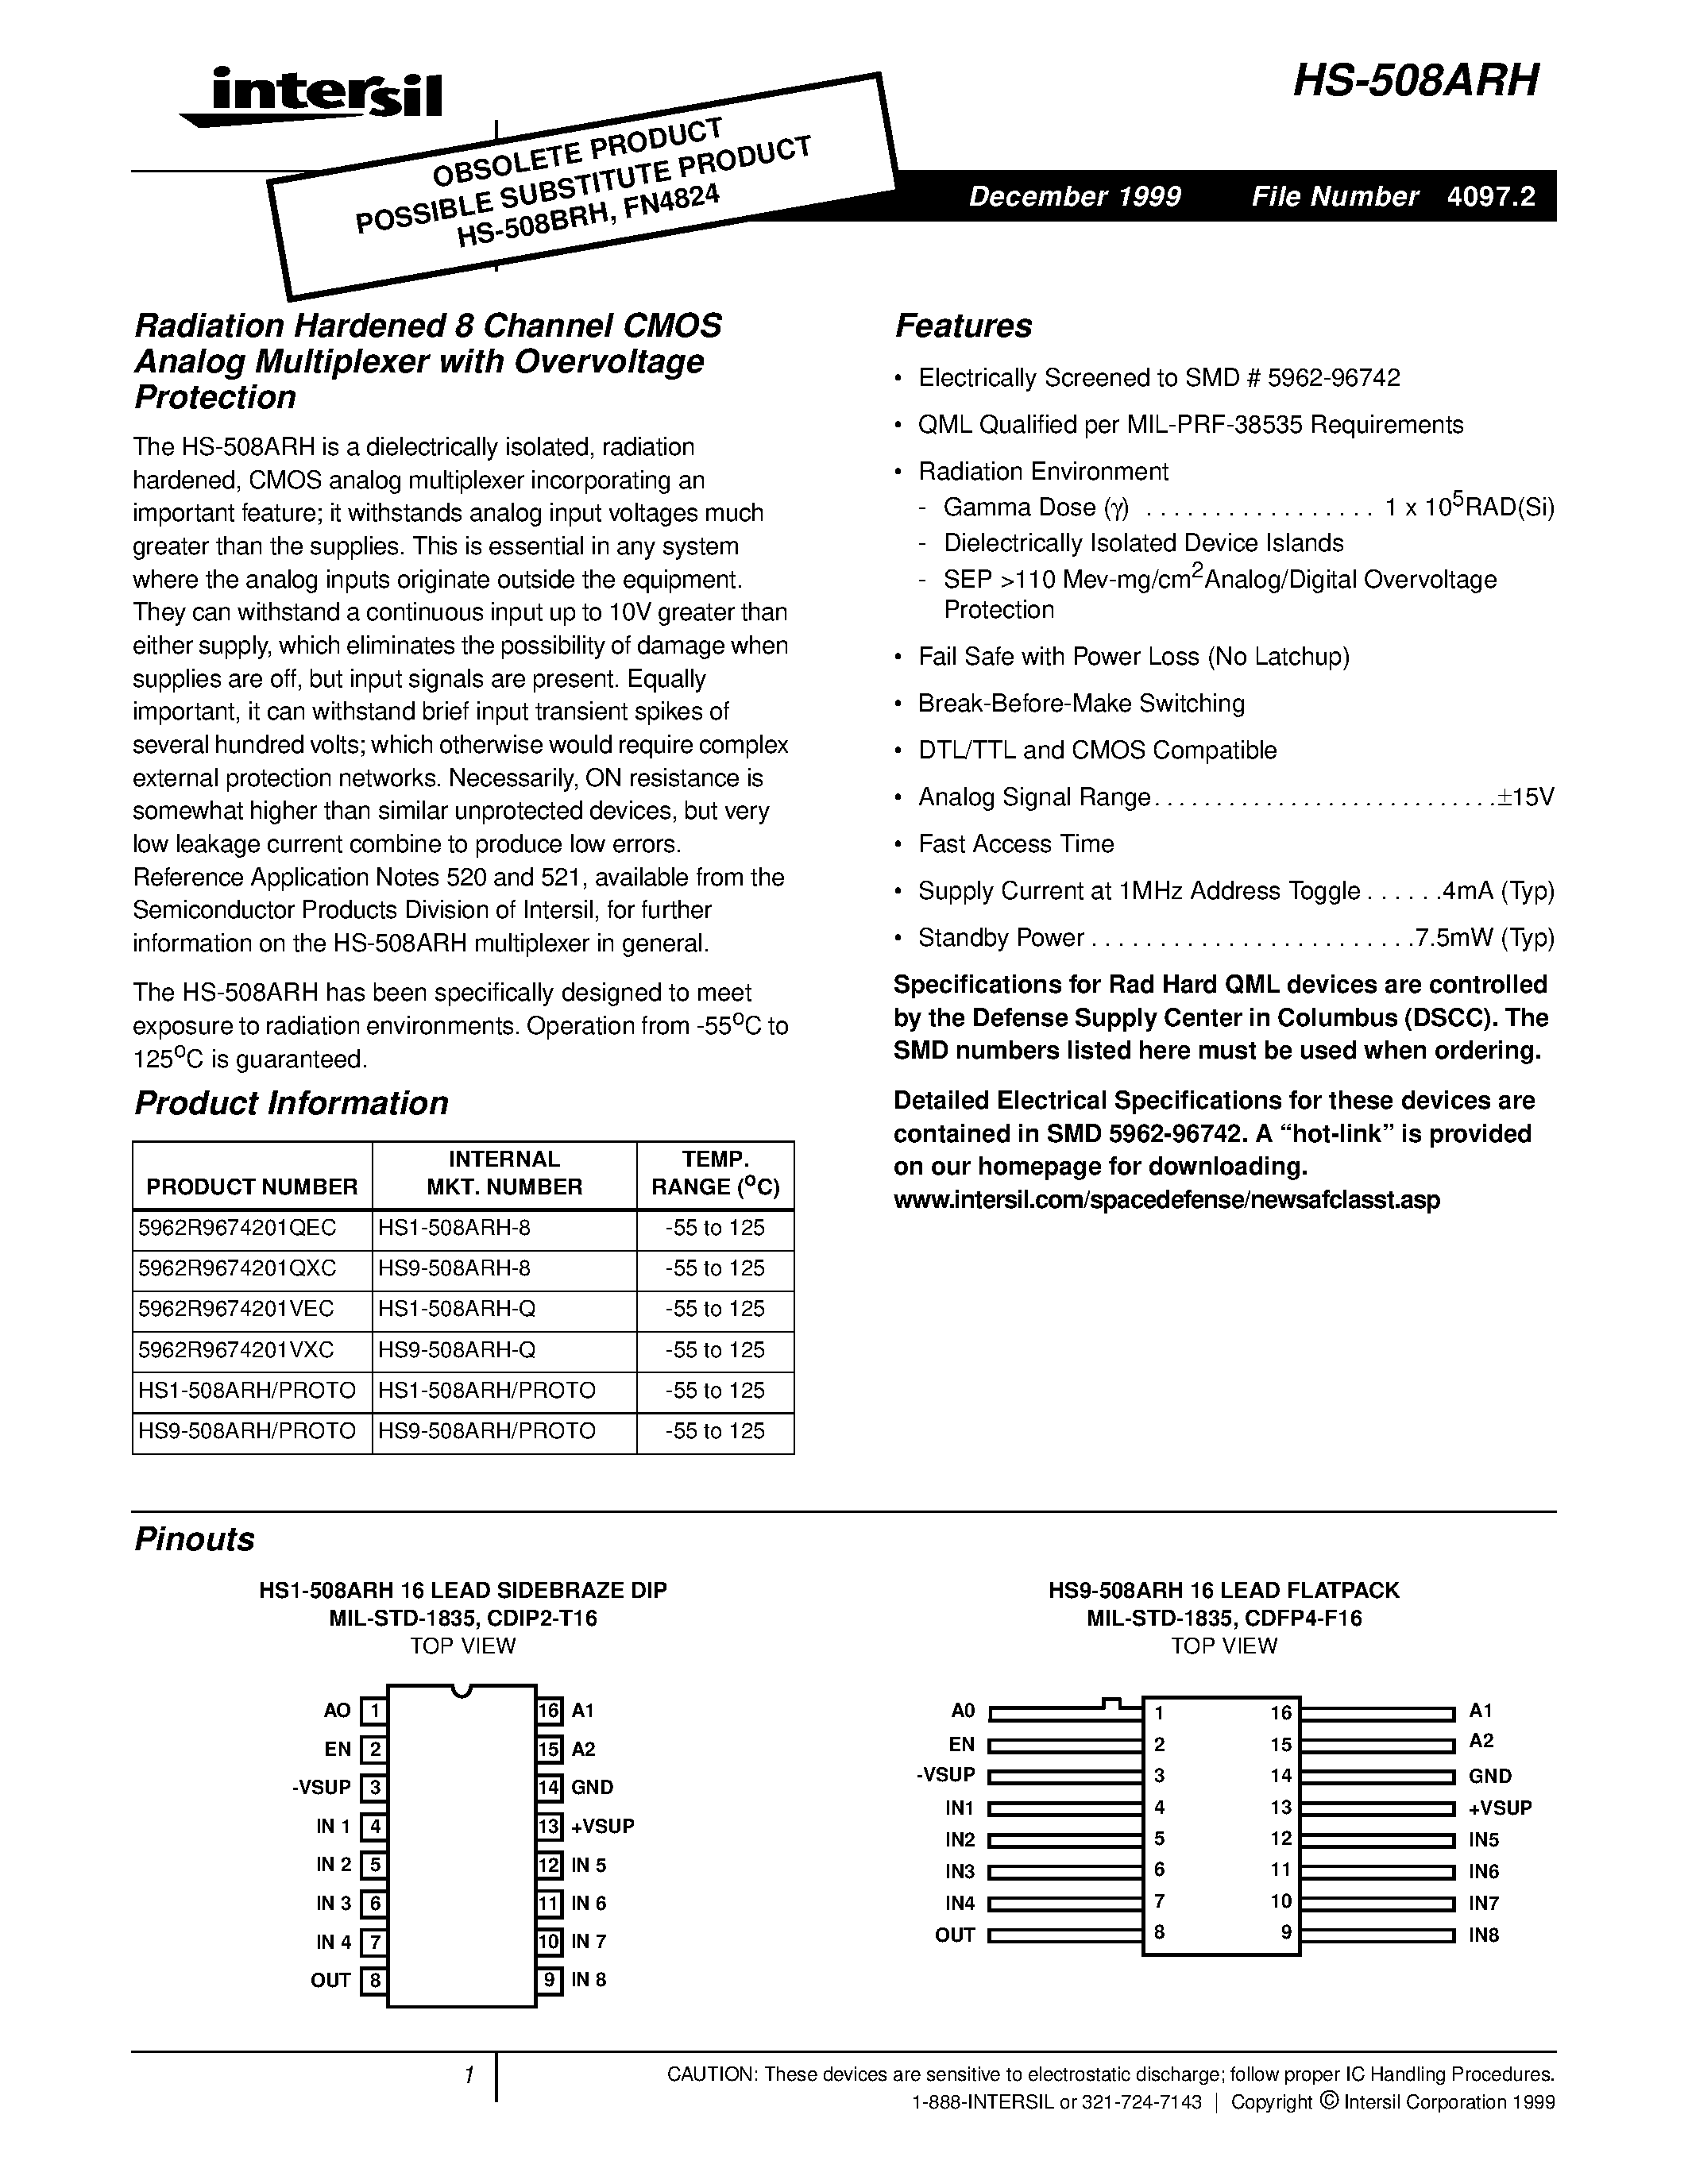 Datasheet HS1-508ARH-8 - Radiation Hardened 8 Channel CMOS Analog Multiplexer with Overvoltage Protection page 1